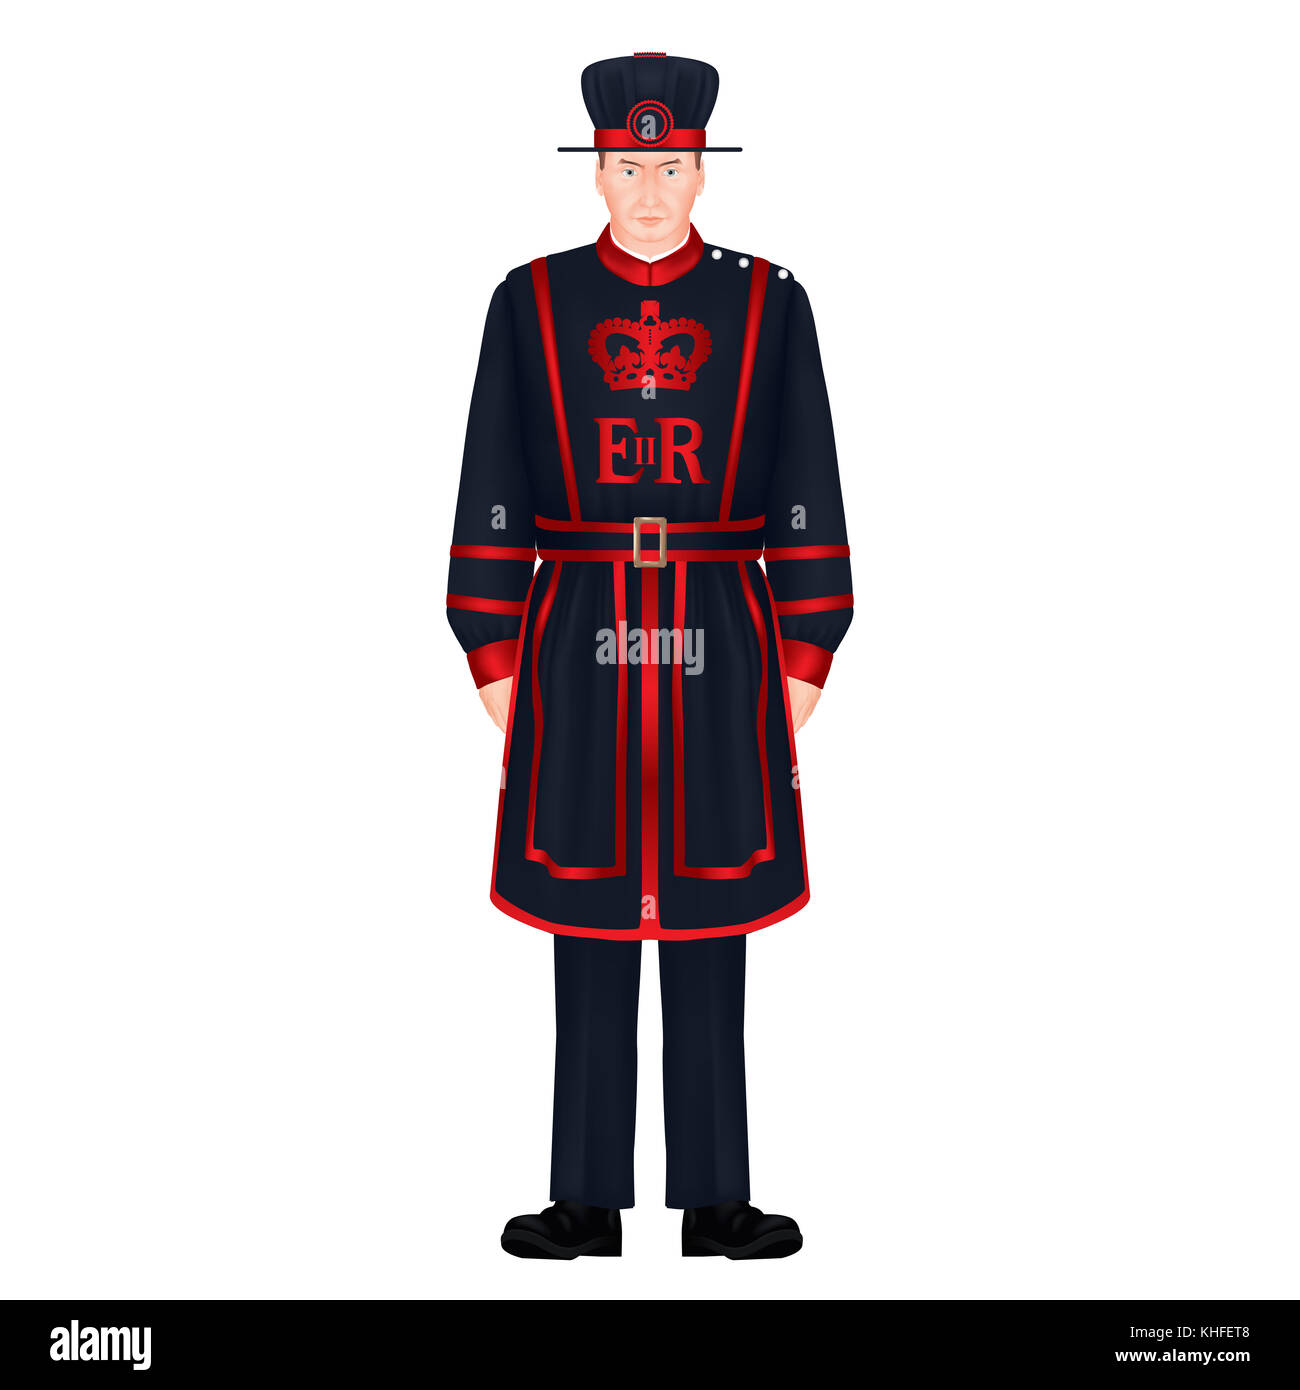 Beefeater soldier - Yeoman warder - Royal guard - London character - symbols - very detailed, realistic, isolated illustration white background Stock Photo